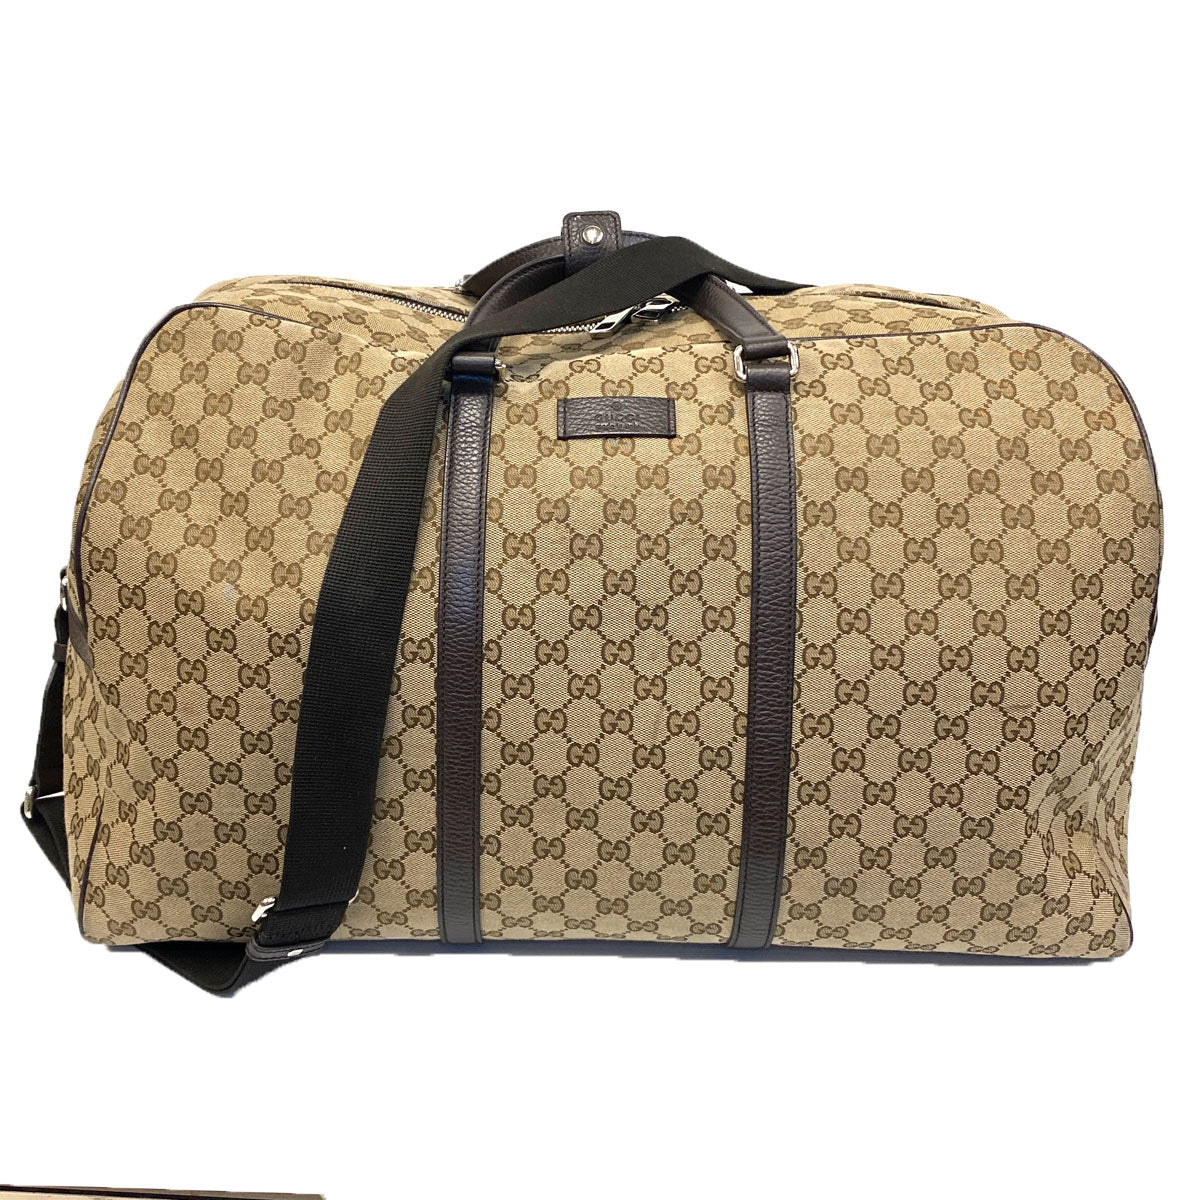 Gucci Large GG Logo Beige Canvas Brown Leather Strap Duffle Bag